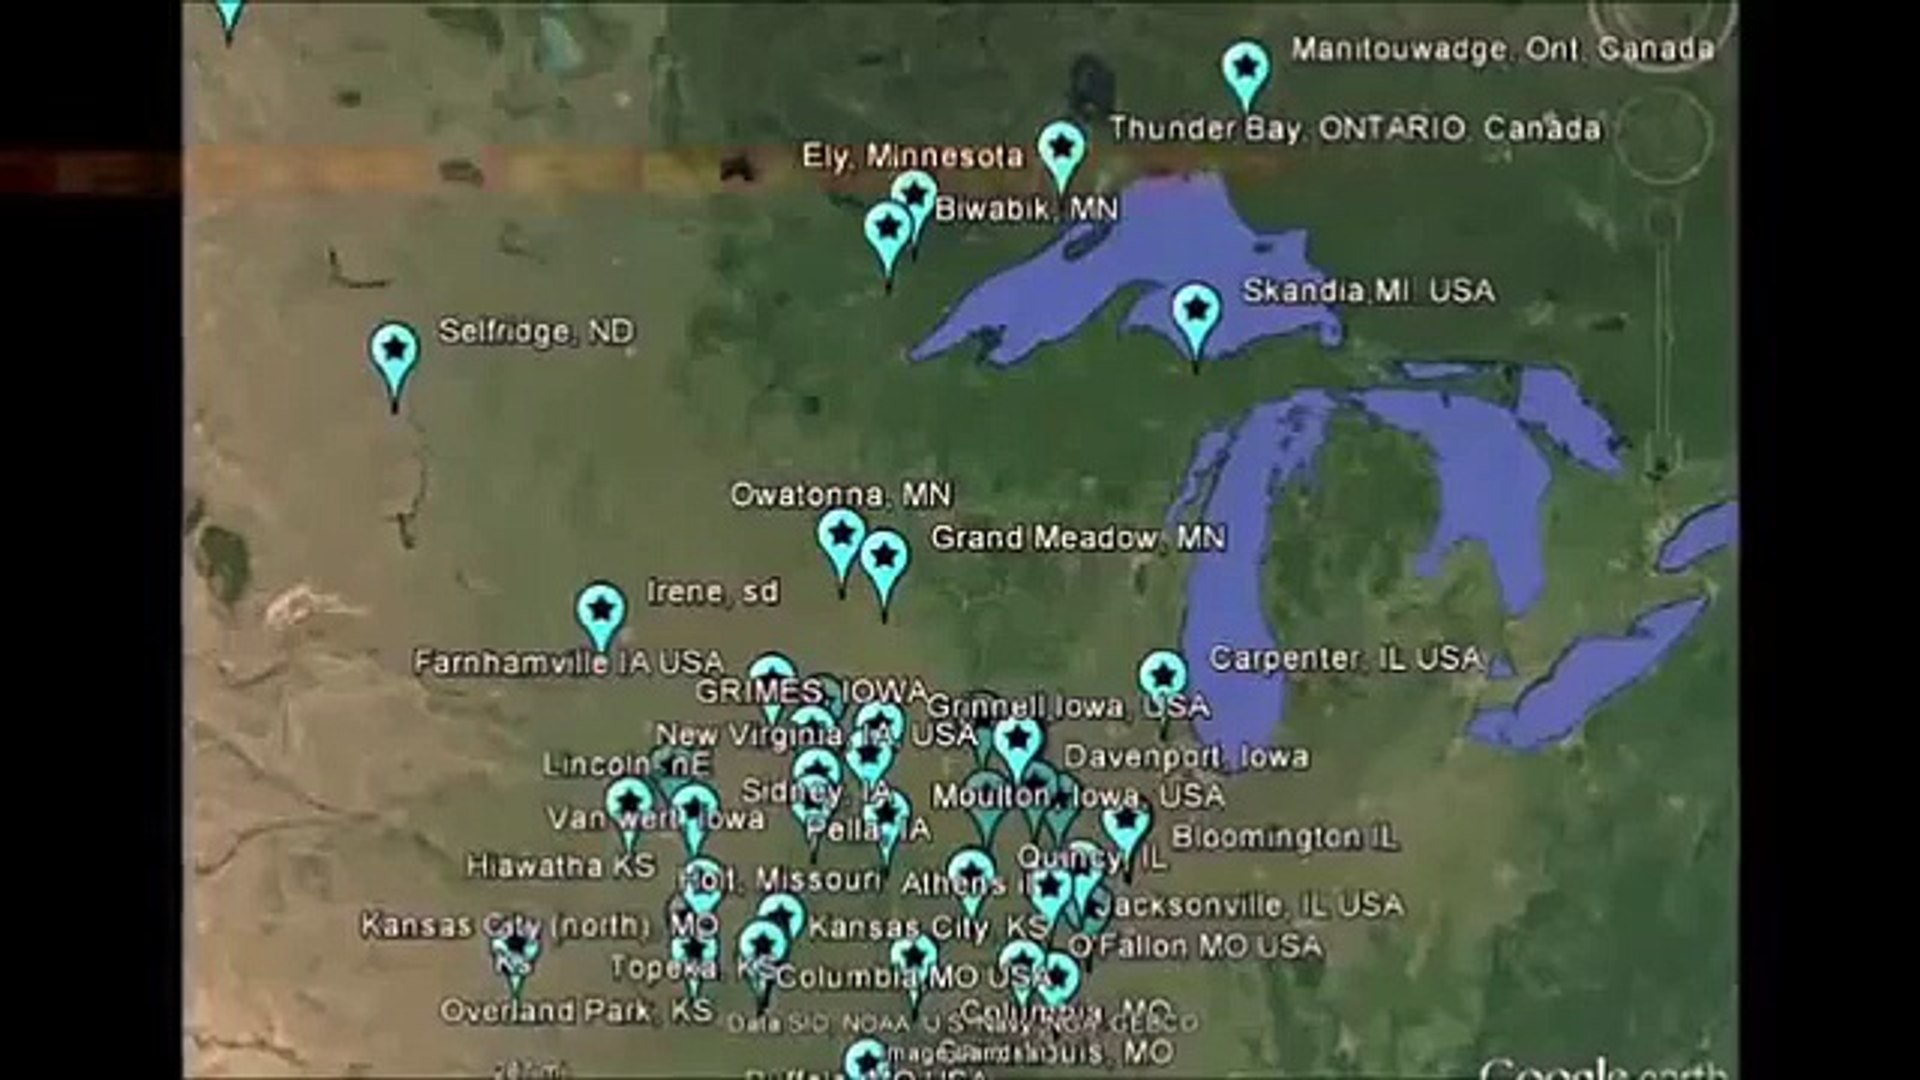 Breaking News: Large Meteor Event Seen at Least 10 States in US and Canada